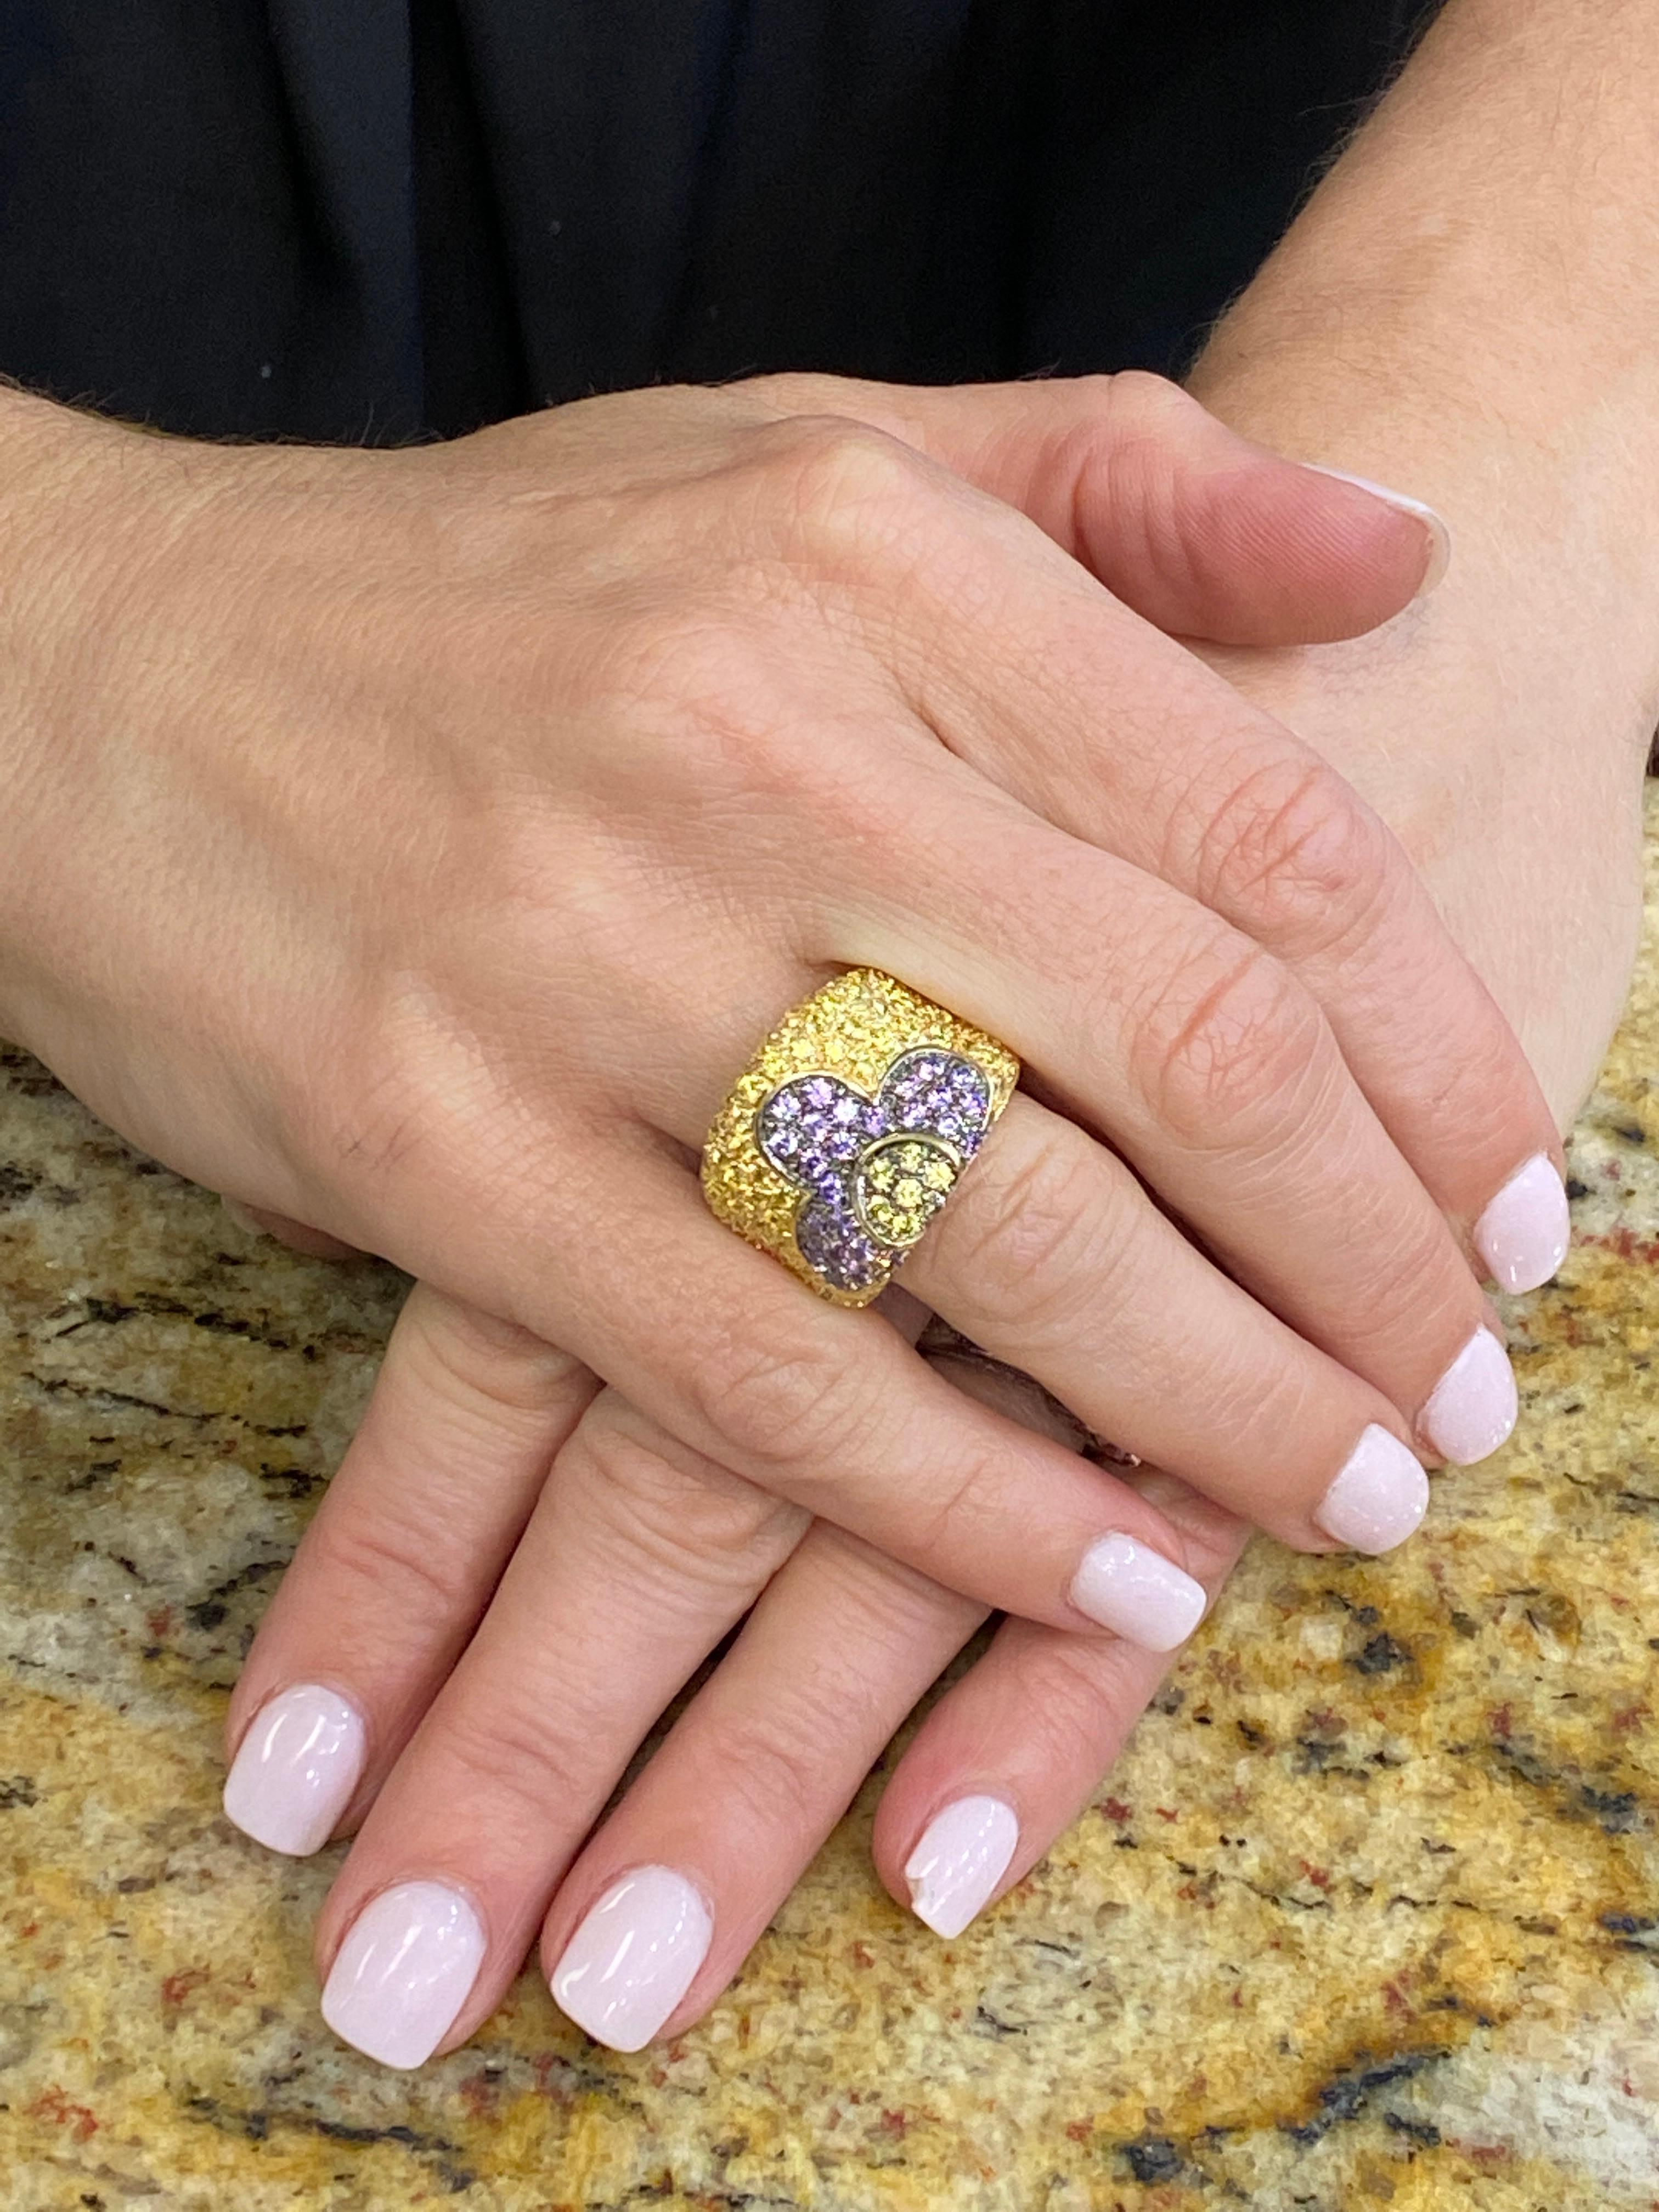 Italian yellow and purple sapphire floral design band fashioned in 18 karat yellow gold. The ring features round brilliant cut yellow and purple sapphire gemstones in a floral design. The ring measures .75 inches in width and is currently size 7.0